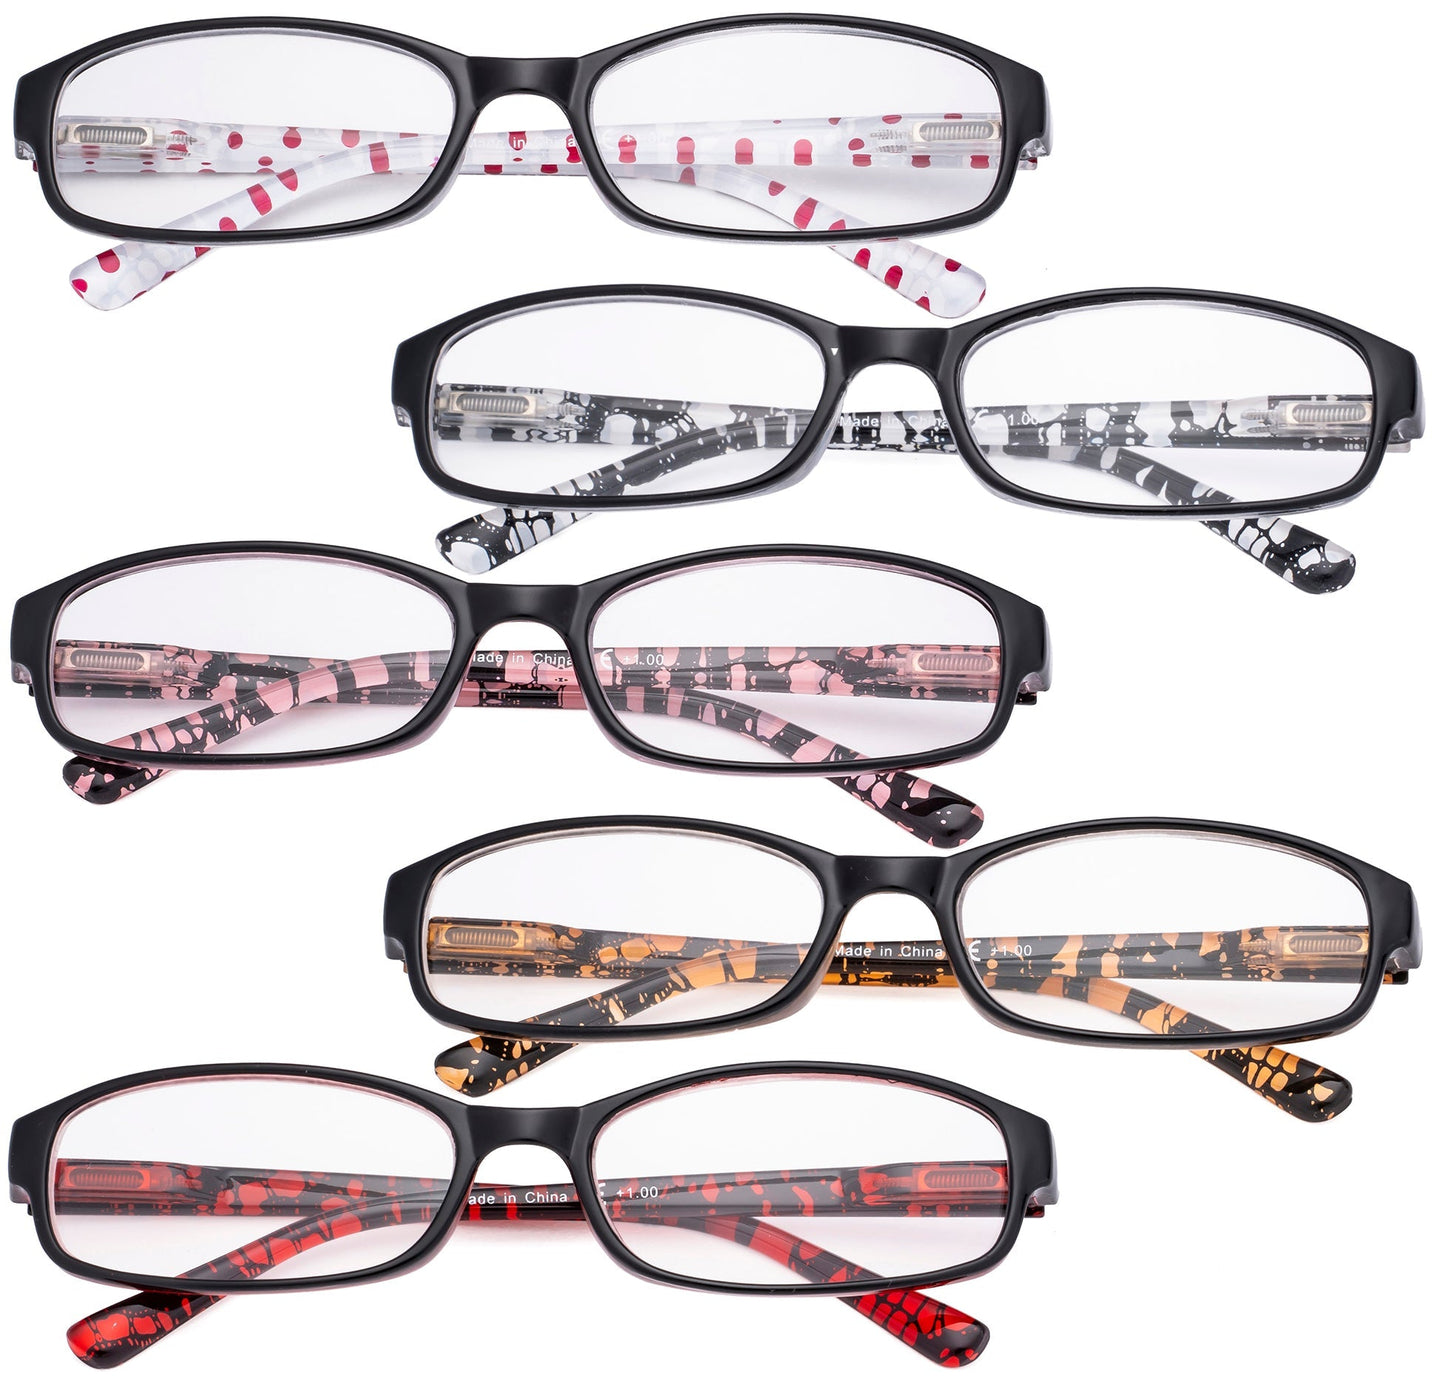 5 Pack Adorable Reading Glasses with Polka Dots Women R908P